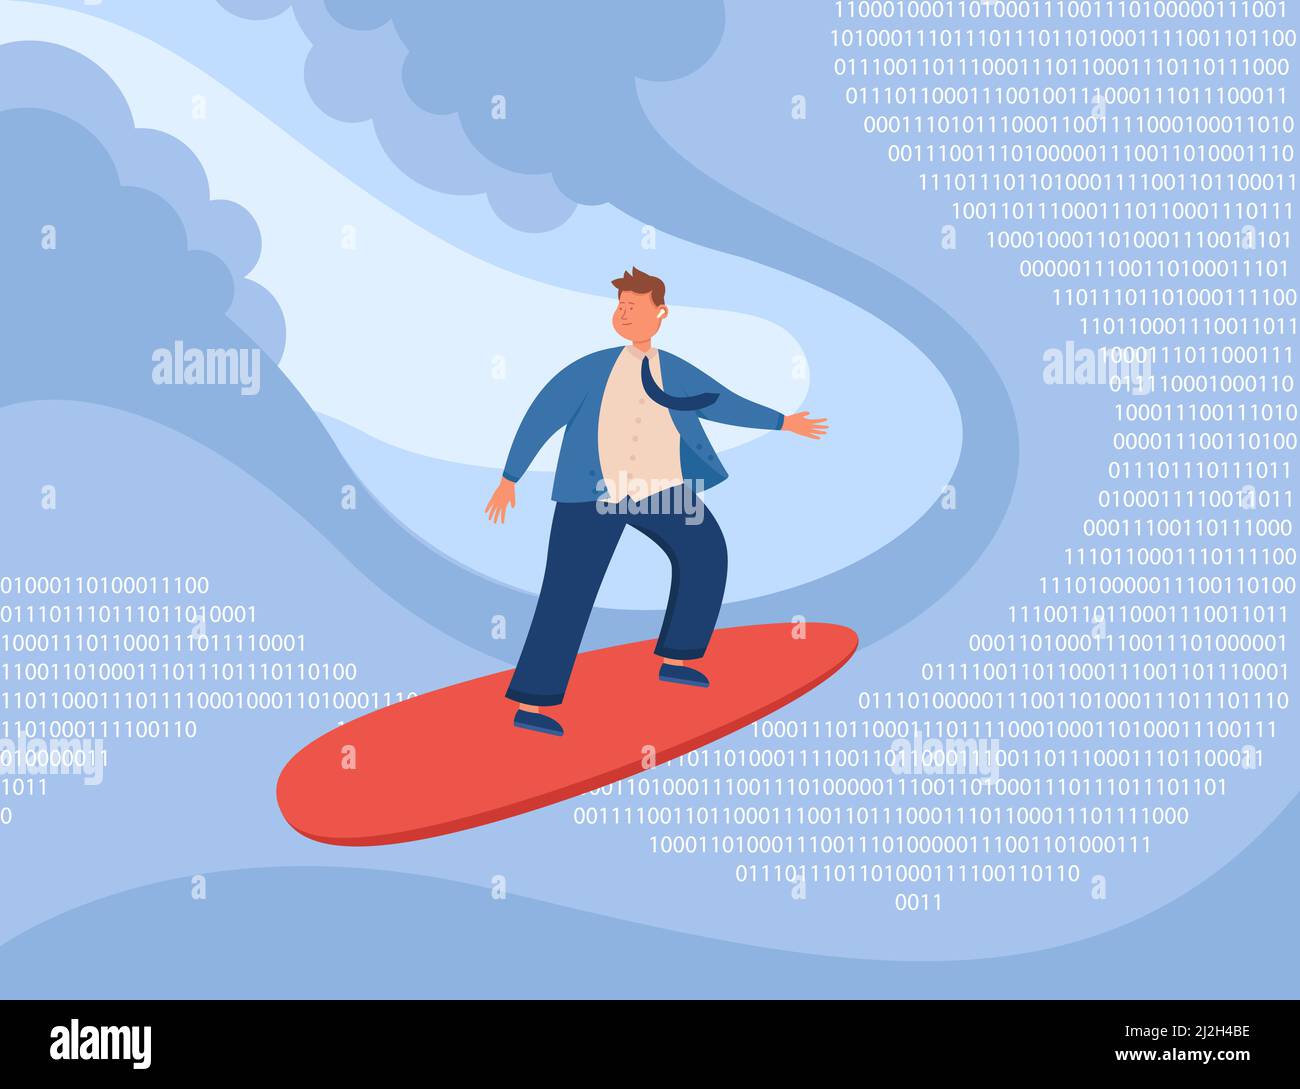 Cartoon businessman surfing on waves of binary numbers. Man exploring digital world full of computer codes flat vector illustration. Challenge, techno Stock Vector